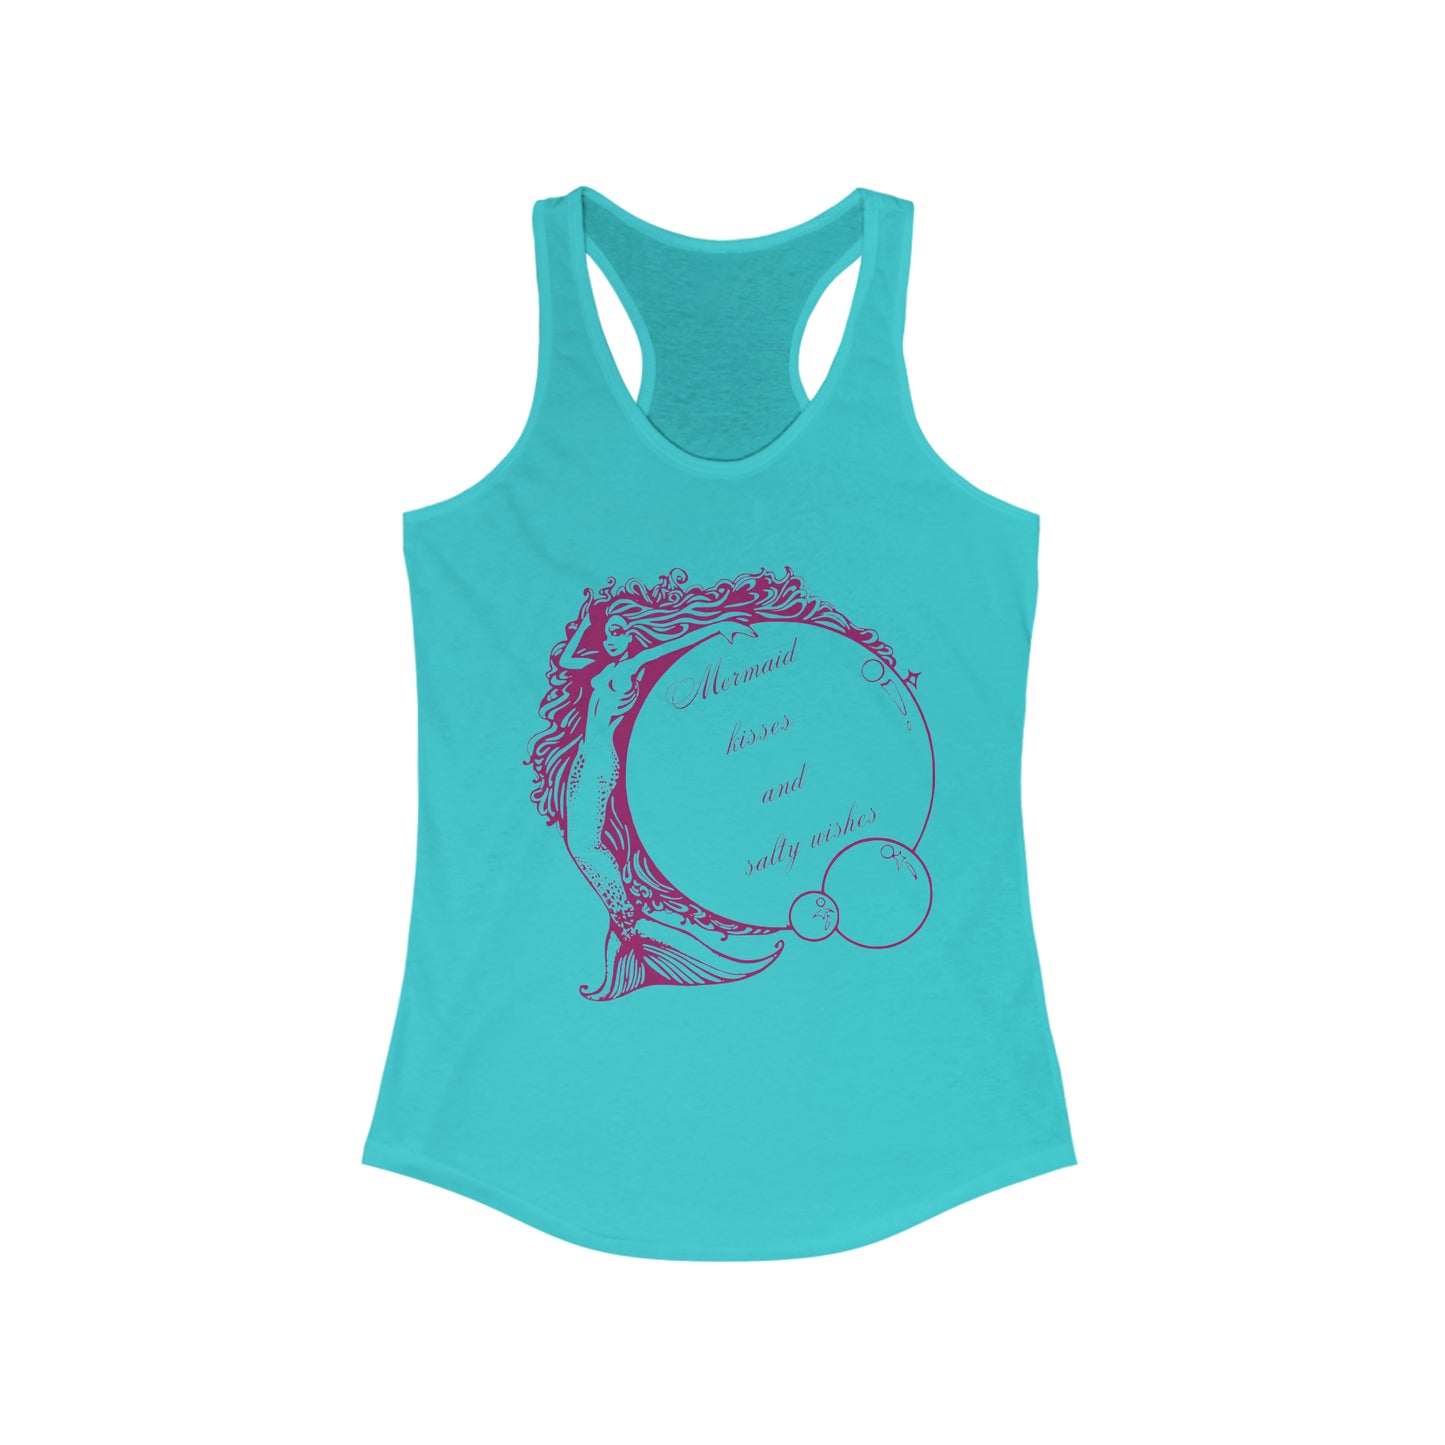 ‘Mermaid Kisses and Salty Wishes.’ Printed Front & Back.  Women's Ideal Racerback Tank